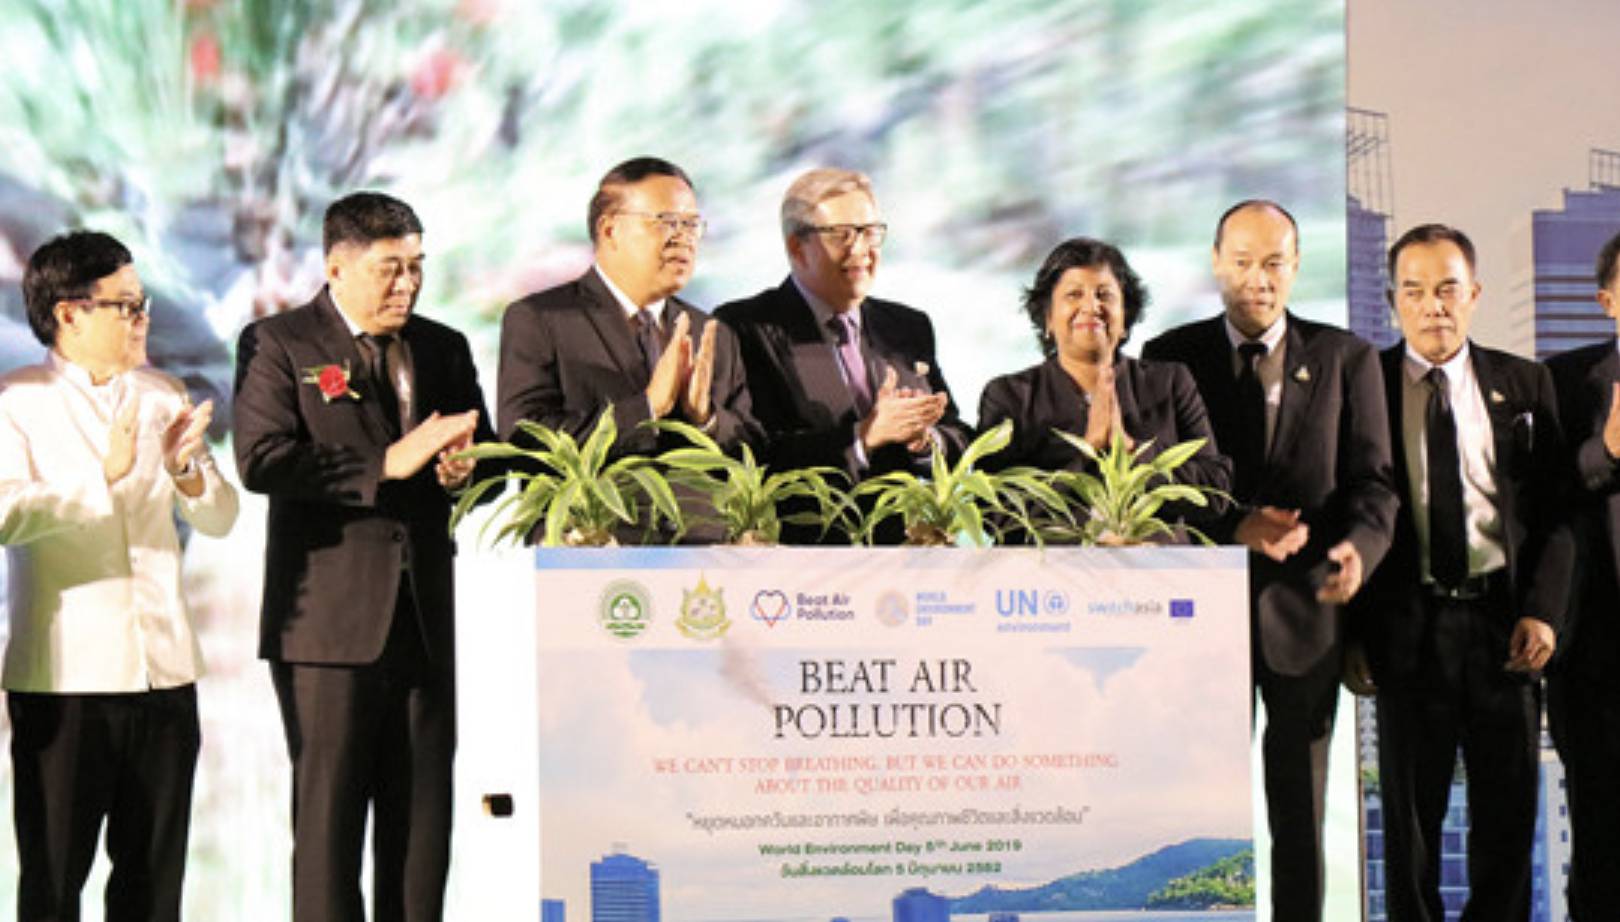 World Environment Day: Green Mobility for Clean Air Policy Dialogue